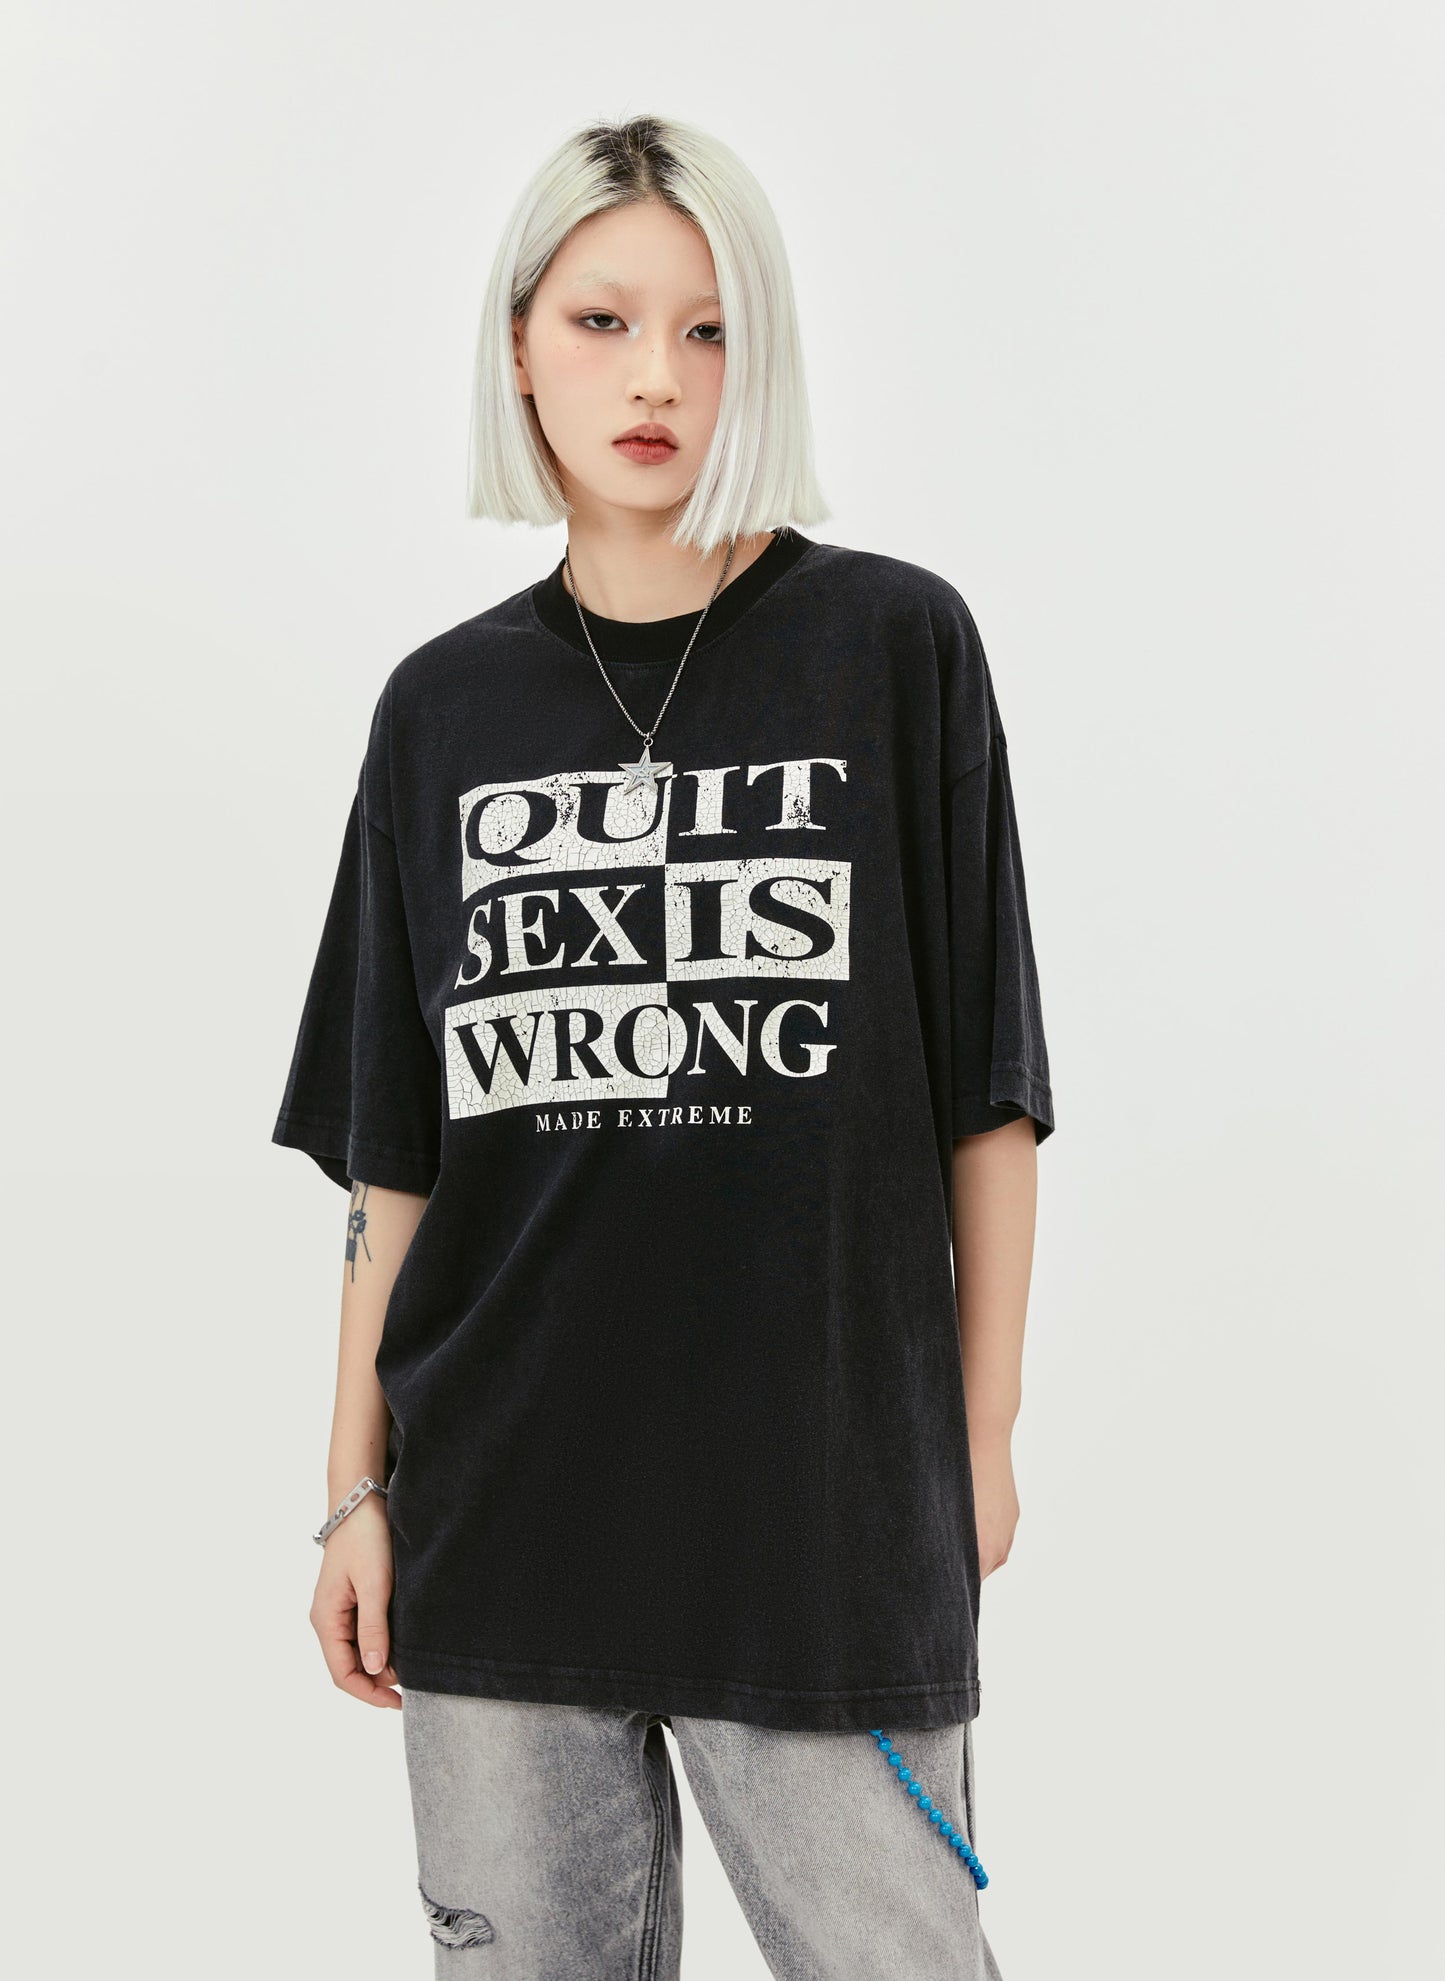 QUIT S*X IS WRONG T-SHIRT